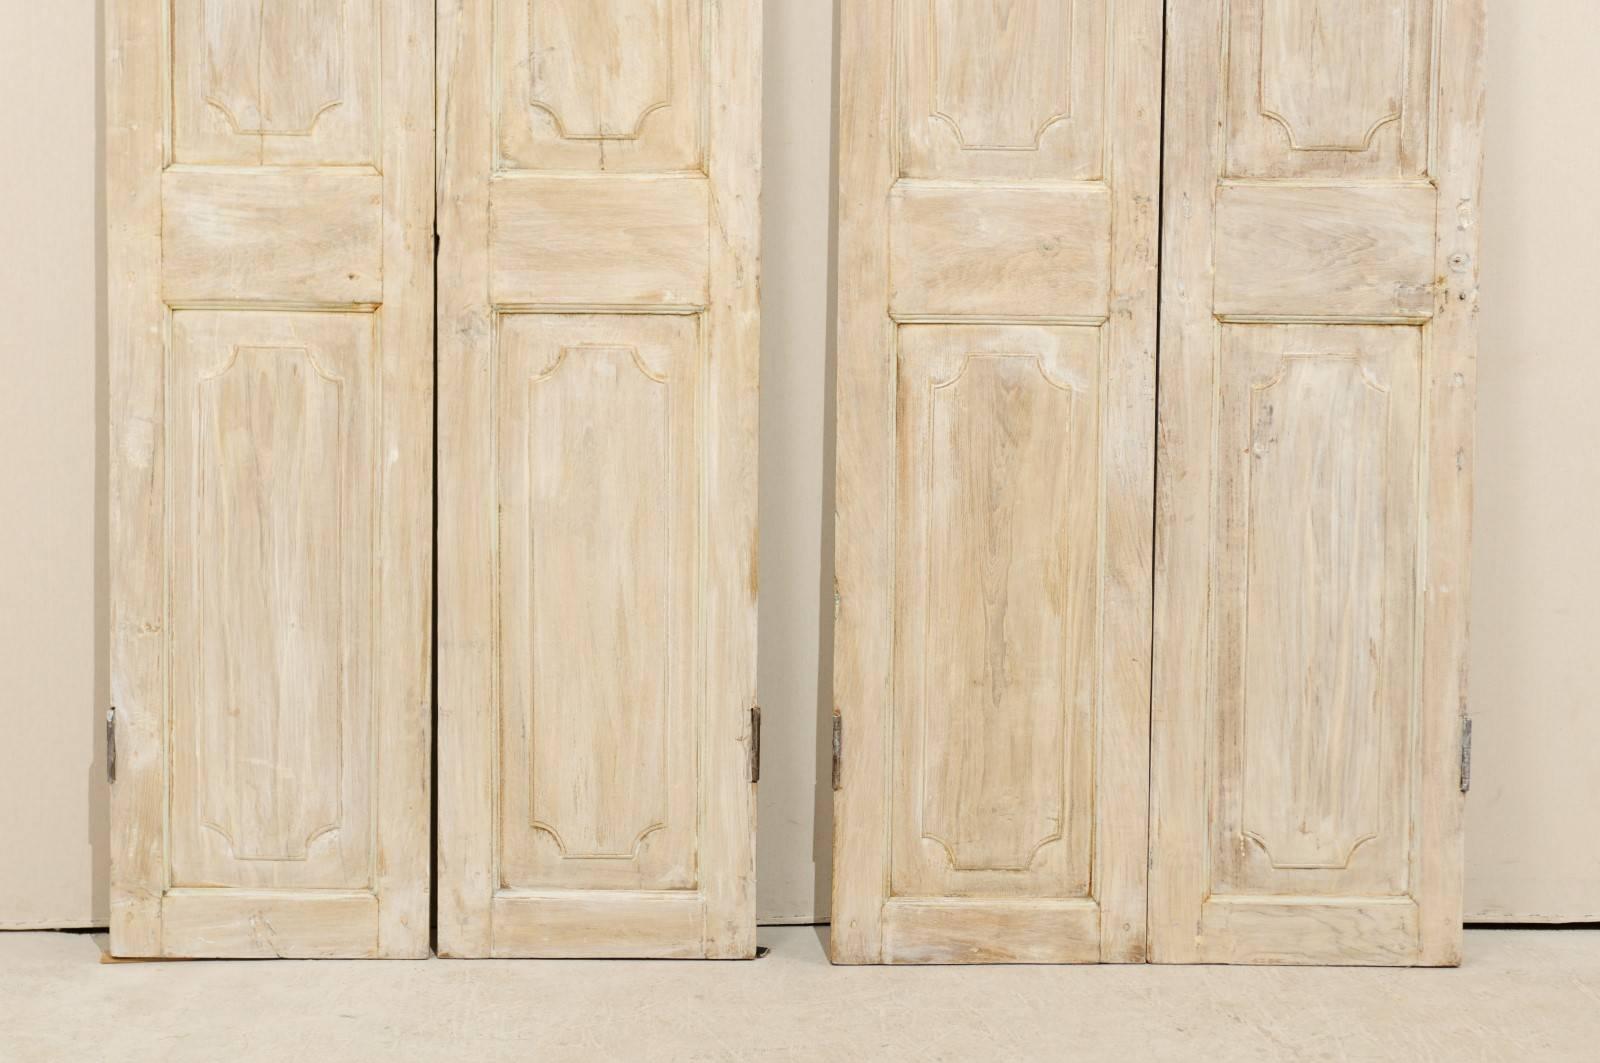 Wood One Pair of Lovely French 19th Century Doors in Antiqued Beige and White Hues